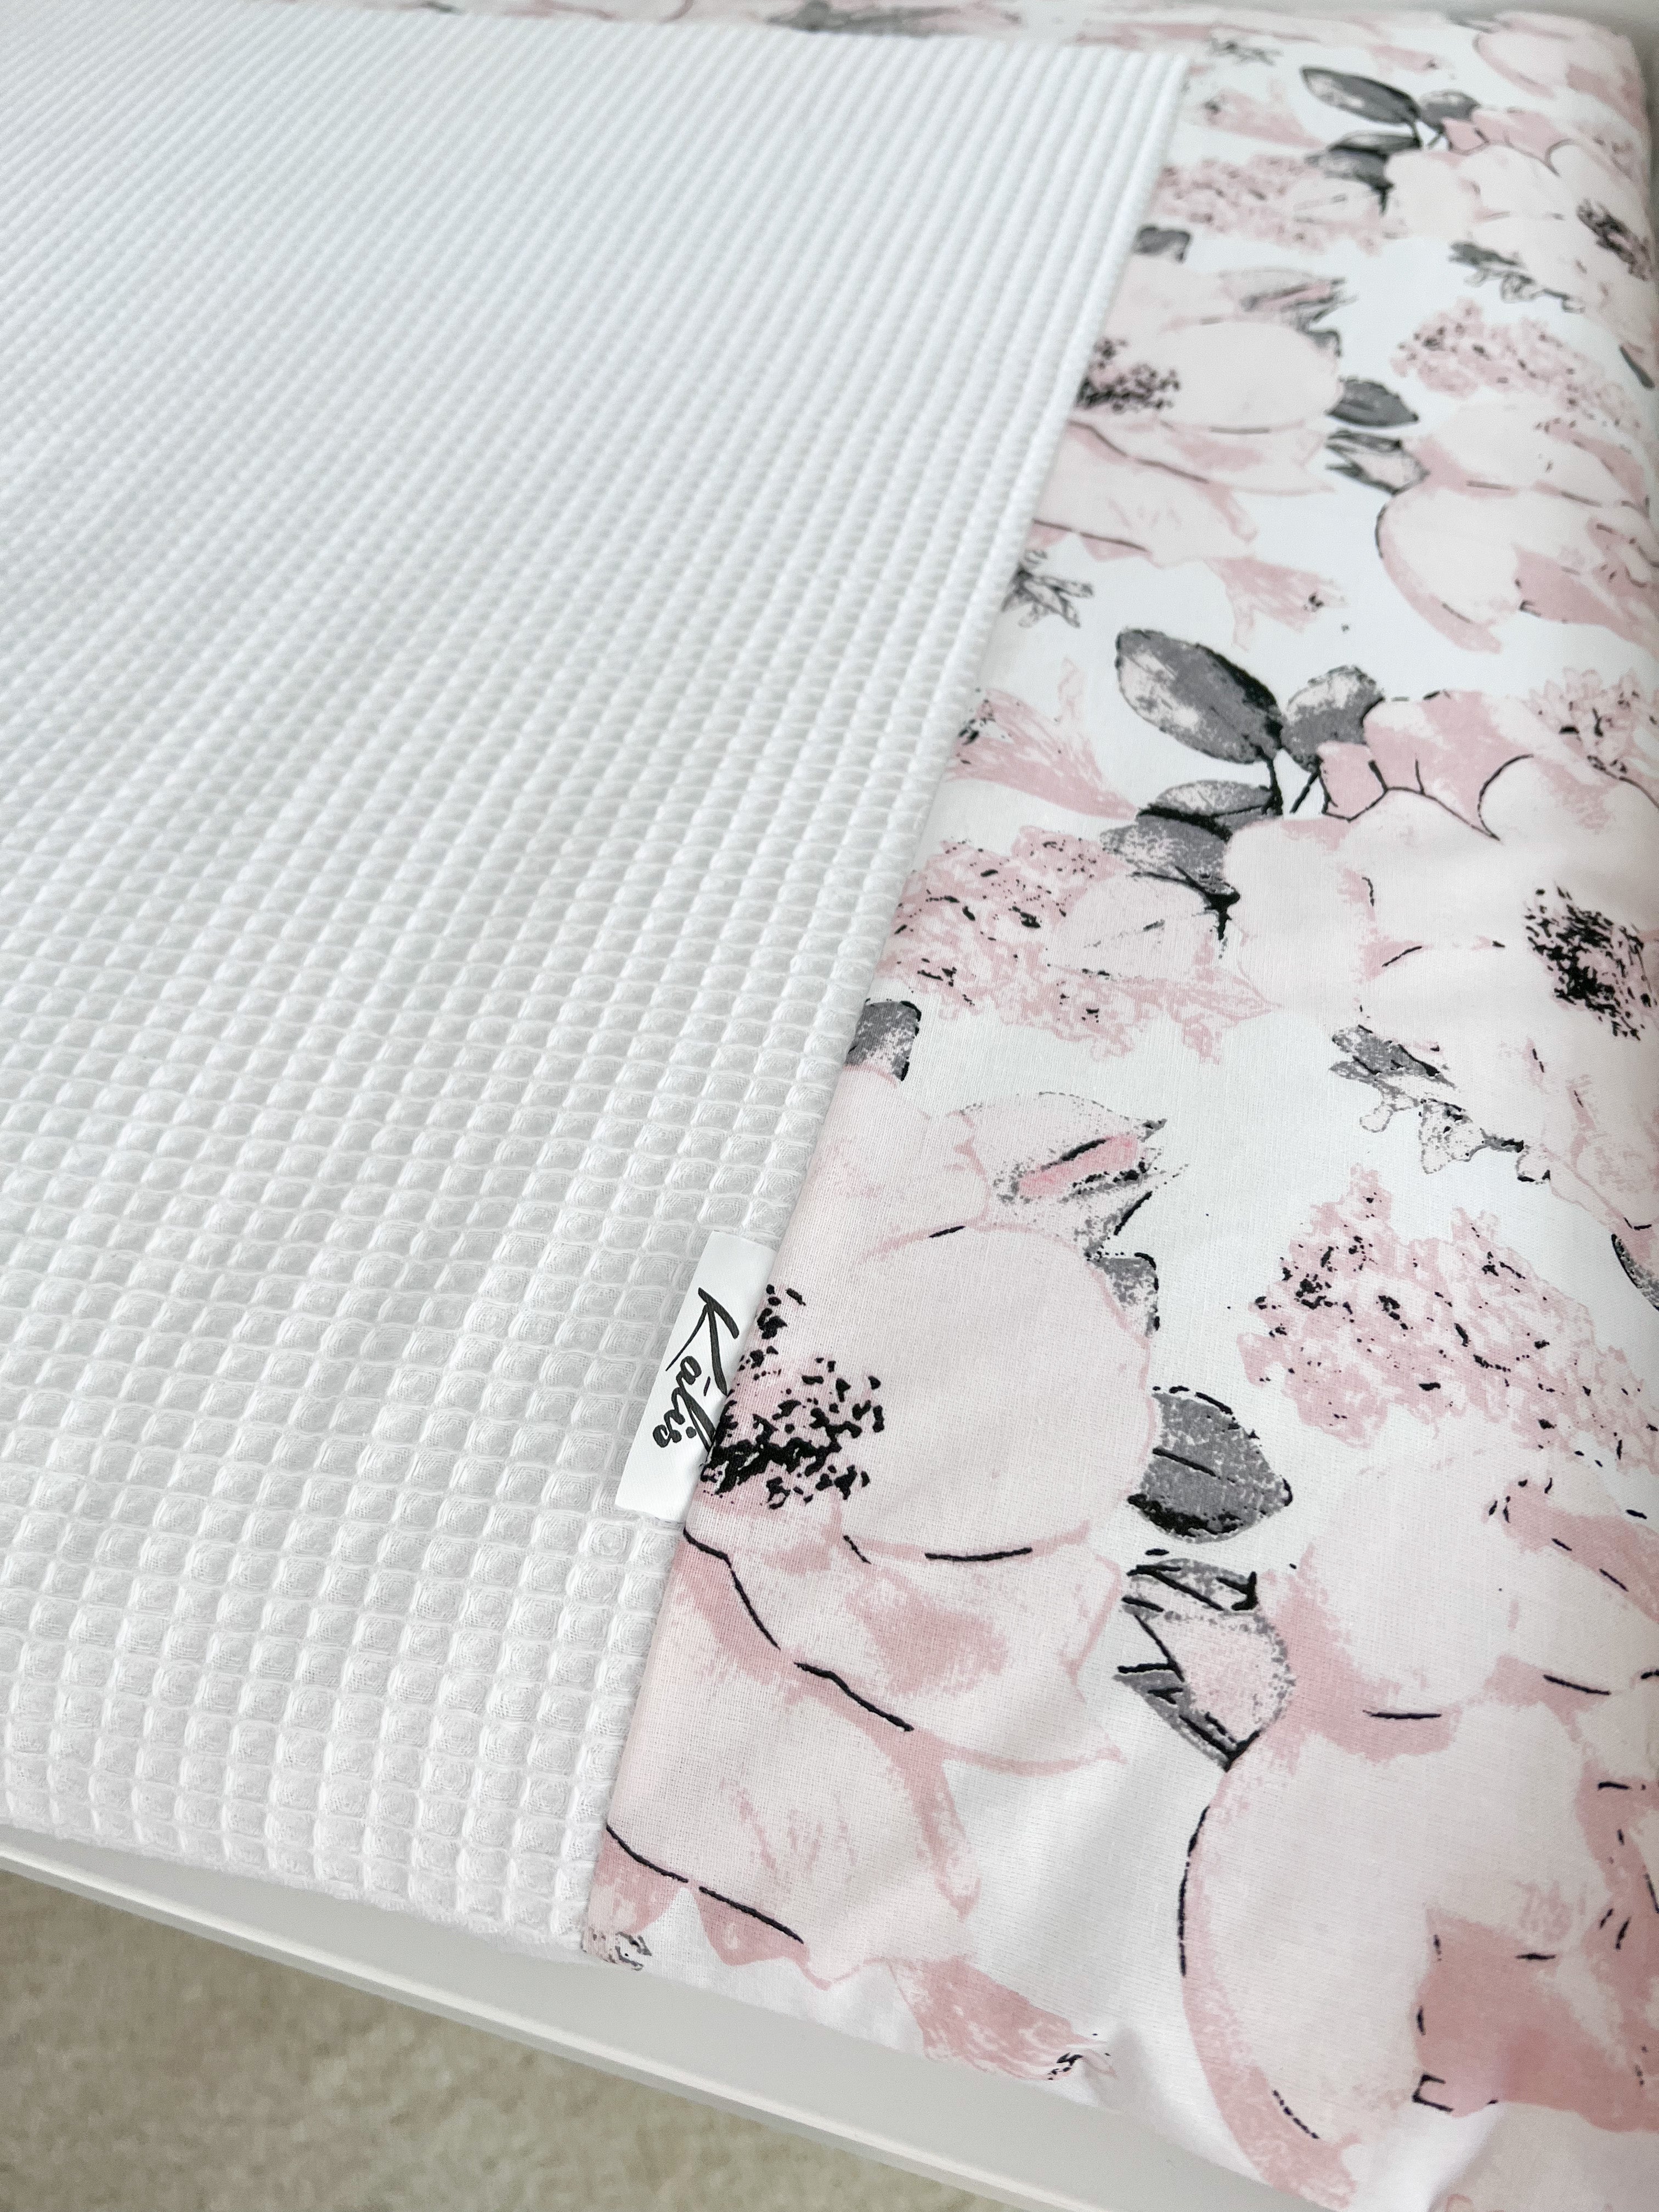 Cotton changing pad - Gray flowers